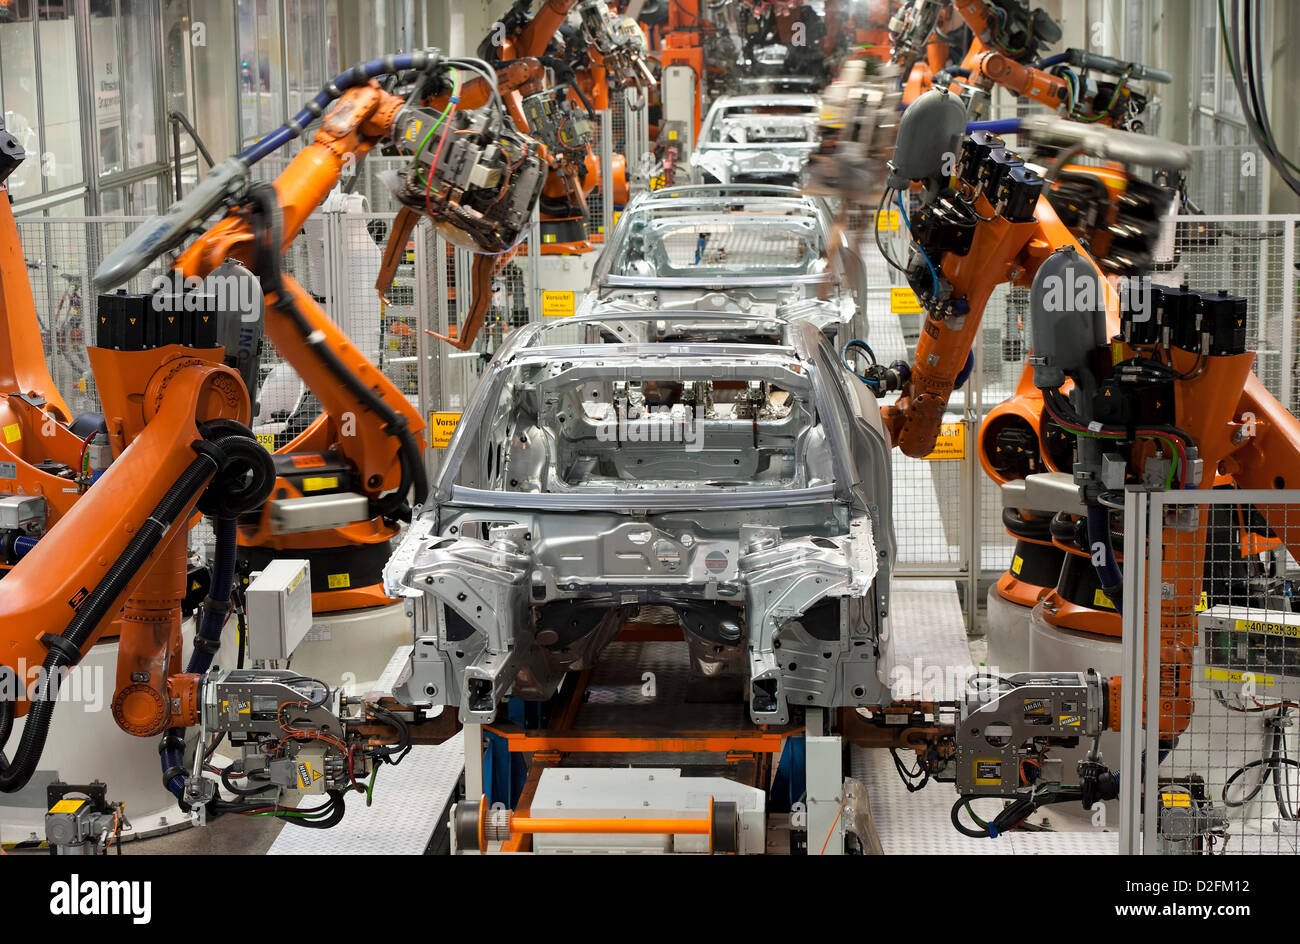 Robots are working on a body framework on Wednesday, 29 February 2012, at the Audi factory in Ingolstadt. Stock Photo